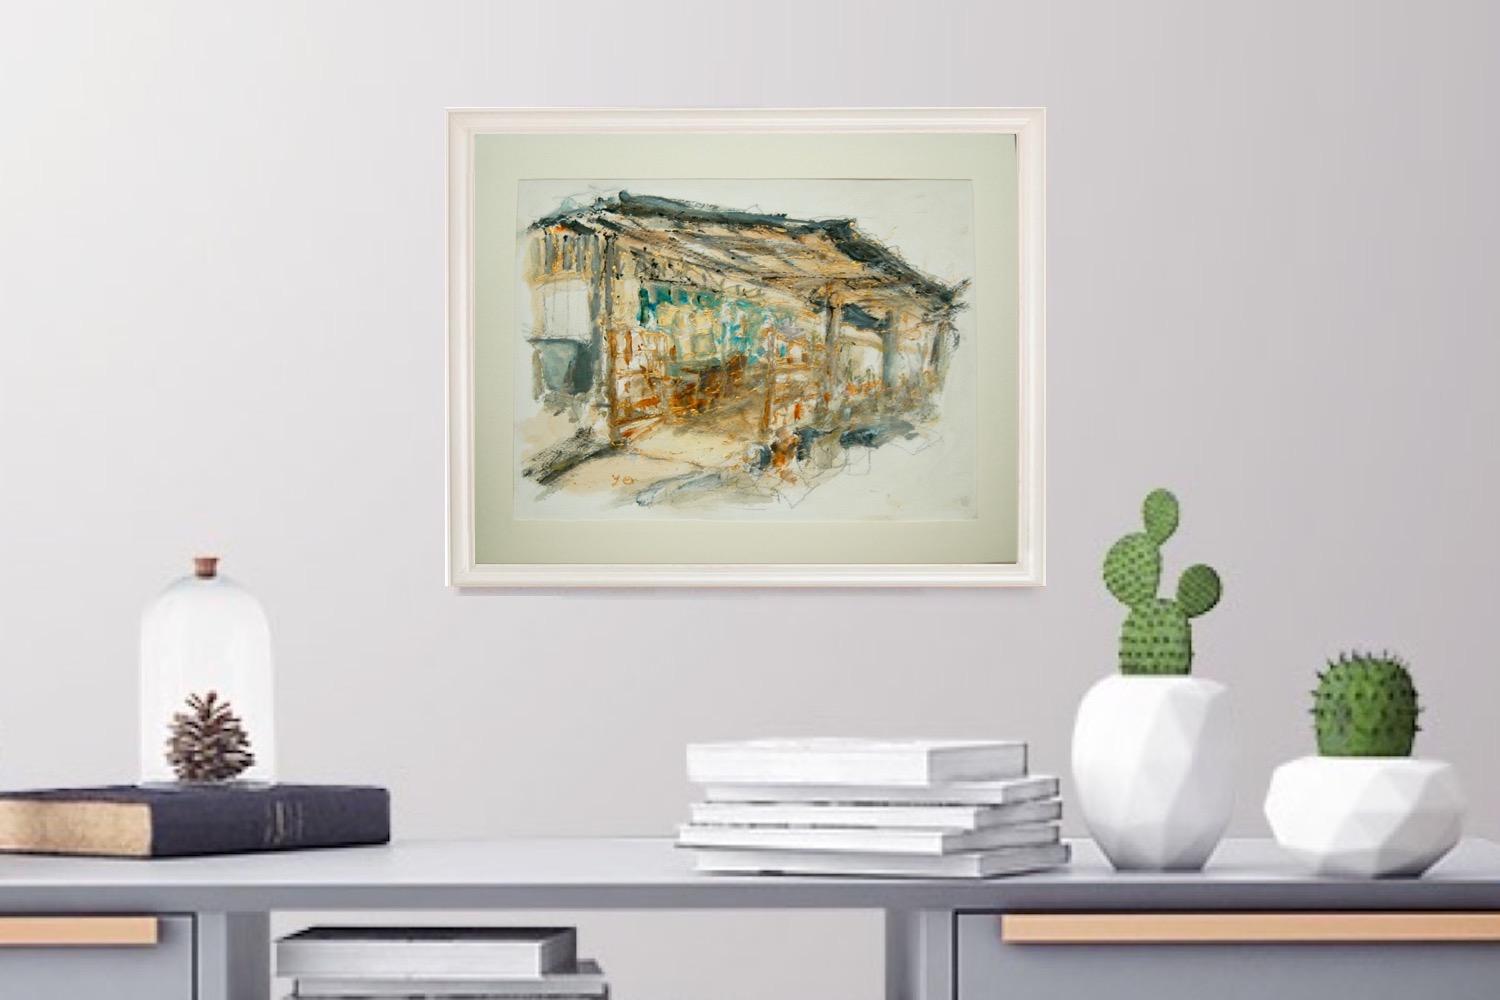 Singapore impressionist painting of kampong house plein air art at pulau ubin island village, malayan attap architecture in biege yellow